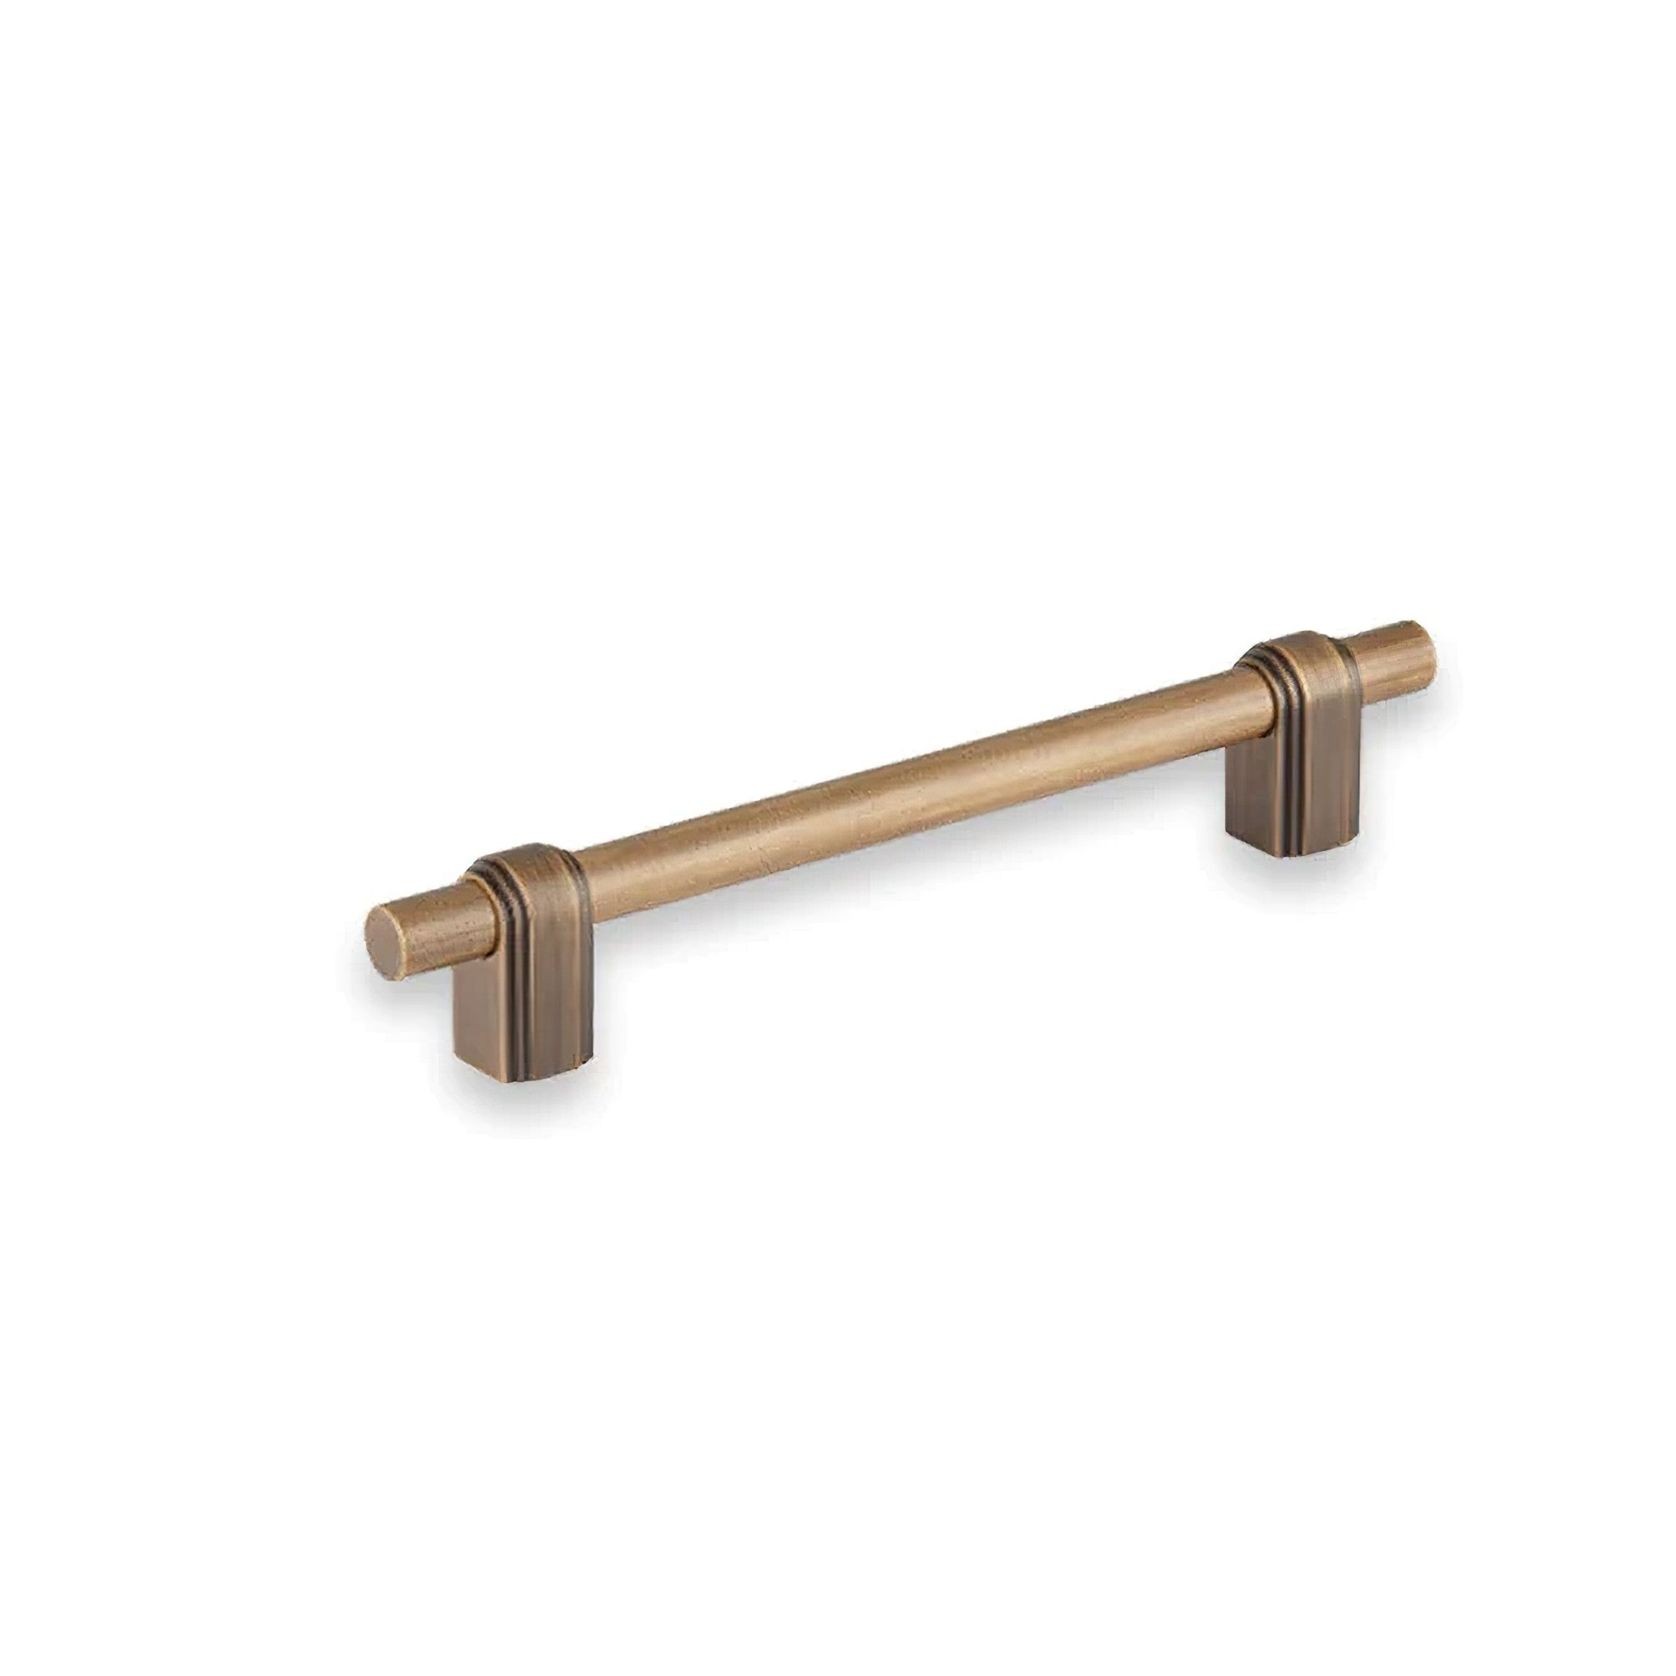 Armac Martin - Gaumont Cabinet Handle / Drawer Pull gallery detail image